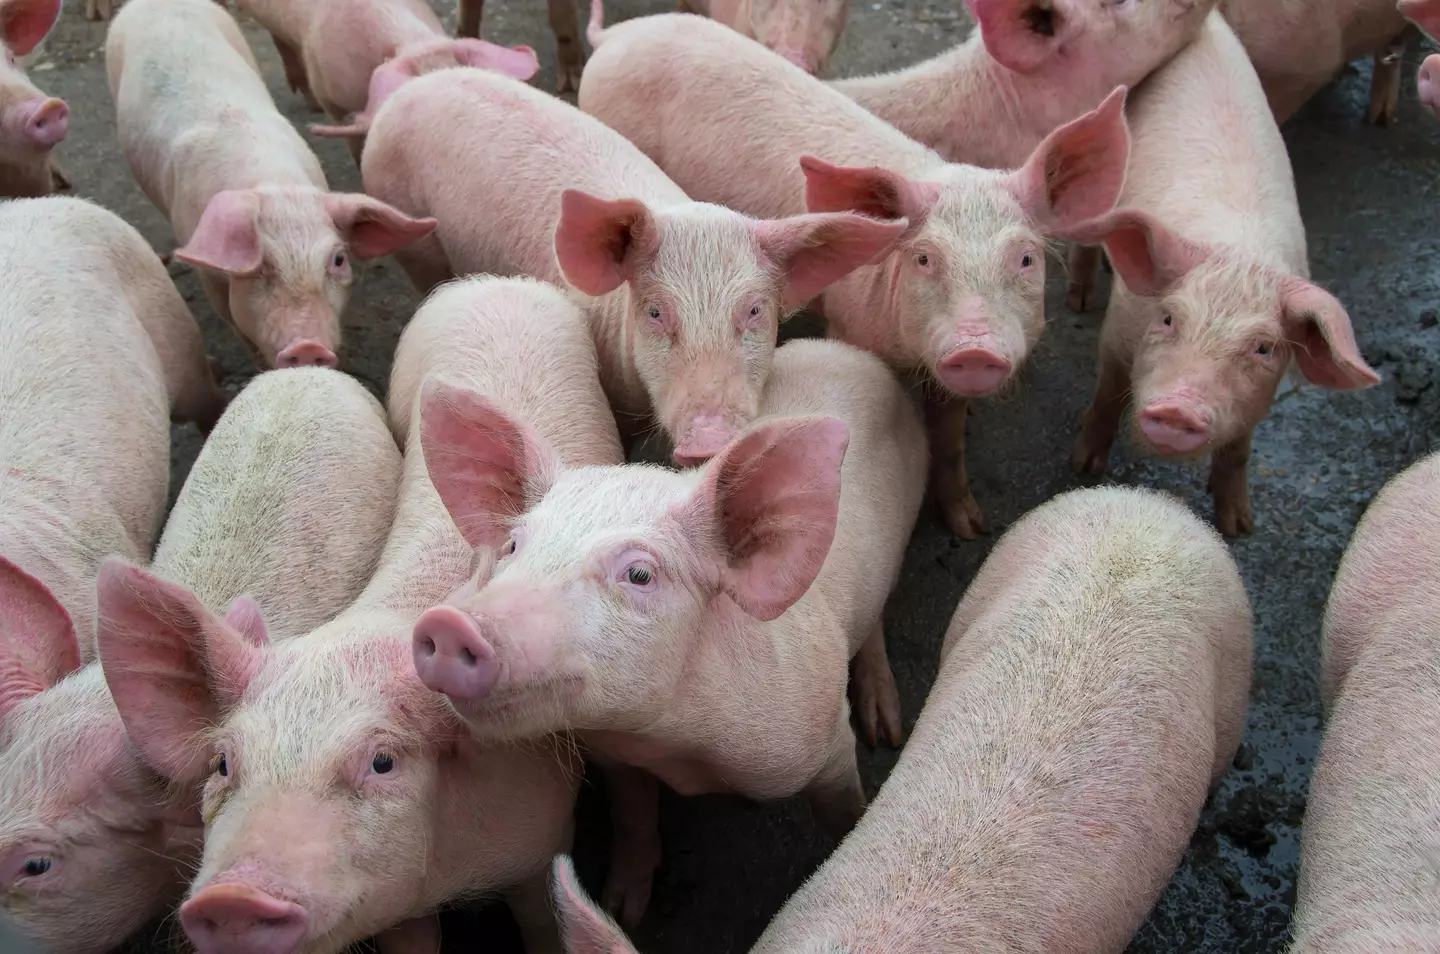 ASF is 'the biggest animal disease outbreak we've ever had on the planet'.